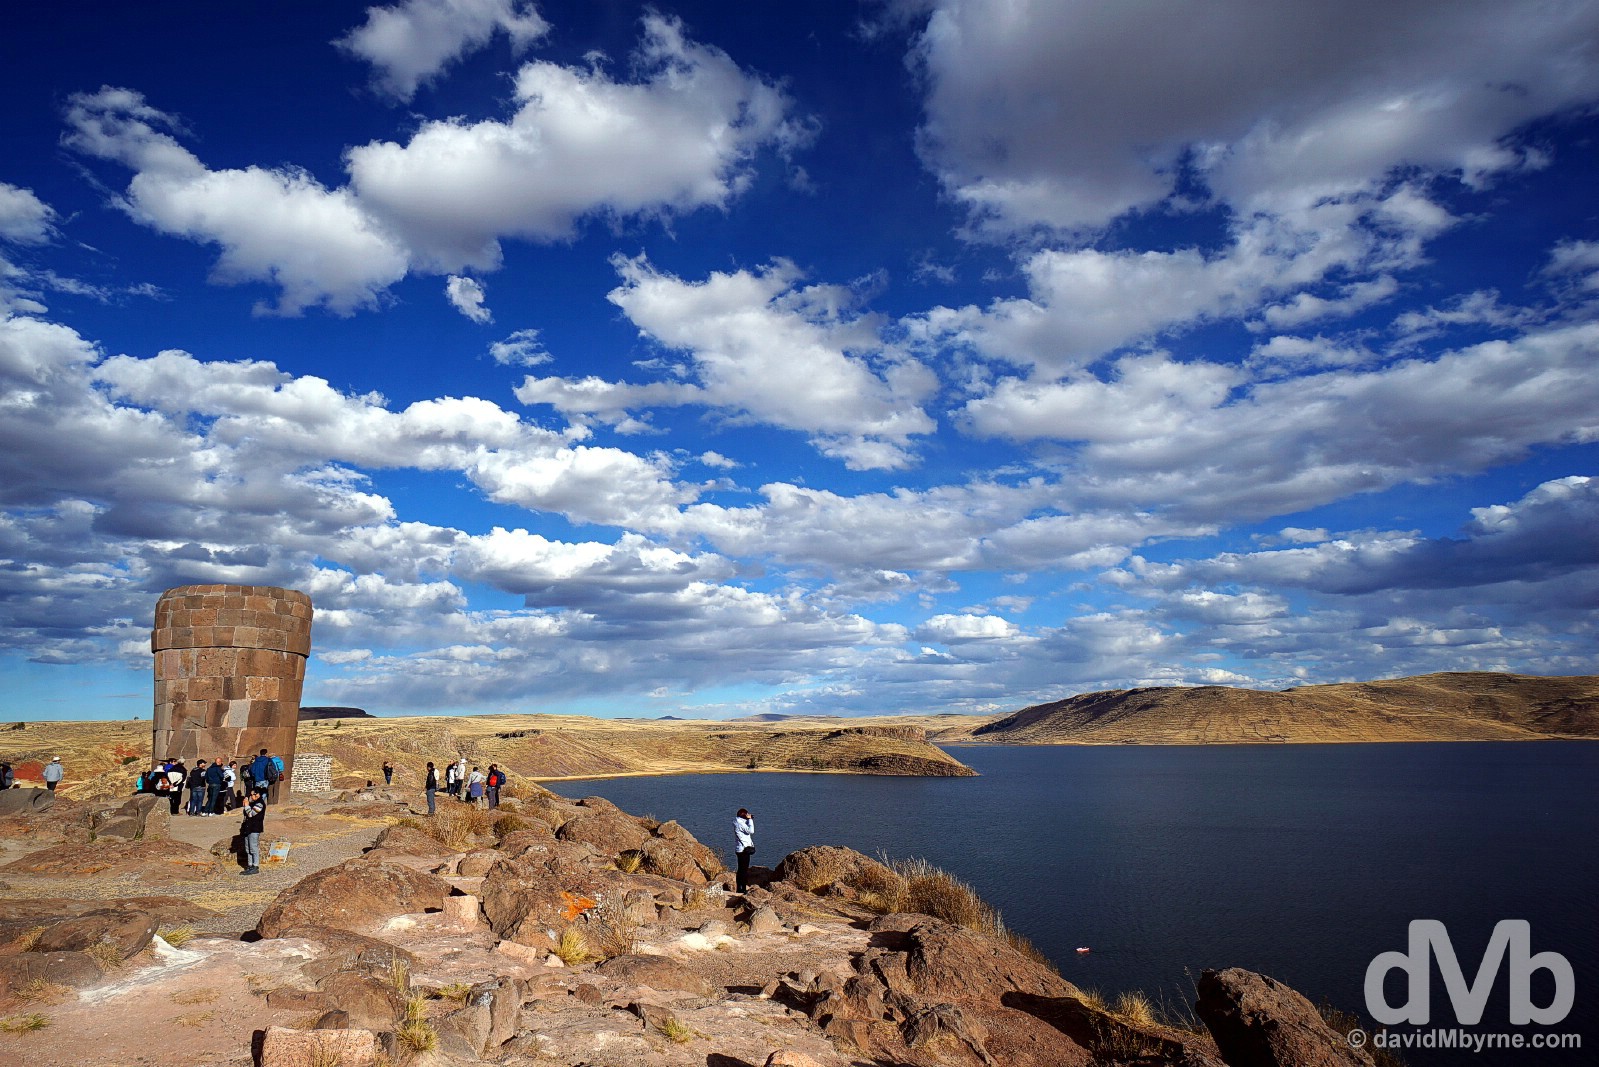 A chullpa, an ancient stone burial tower, on the Sillustani peninsula overlooking Lake Umayo, southern Peru. August 19, 2015. 